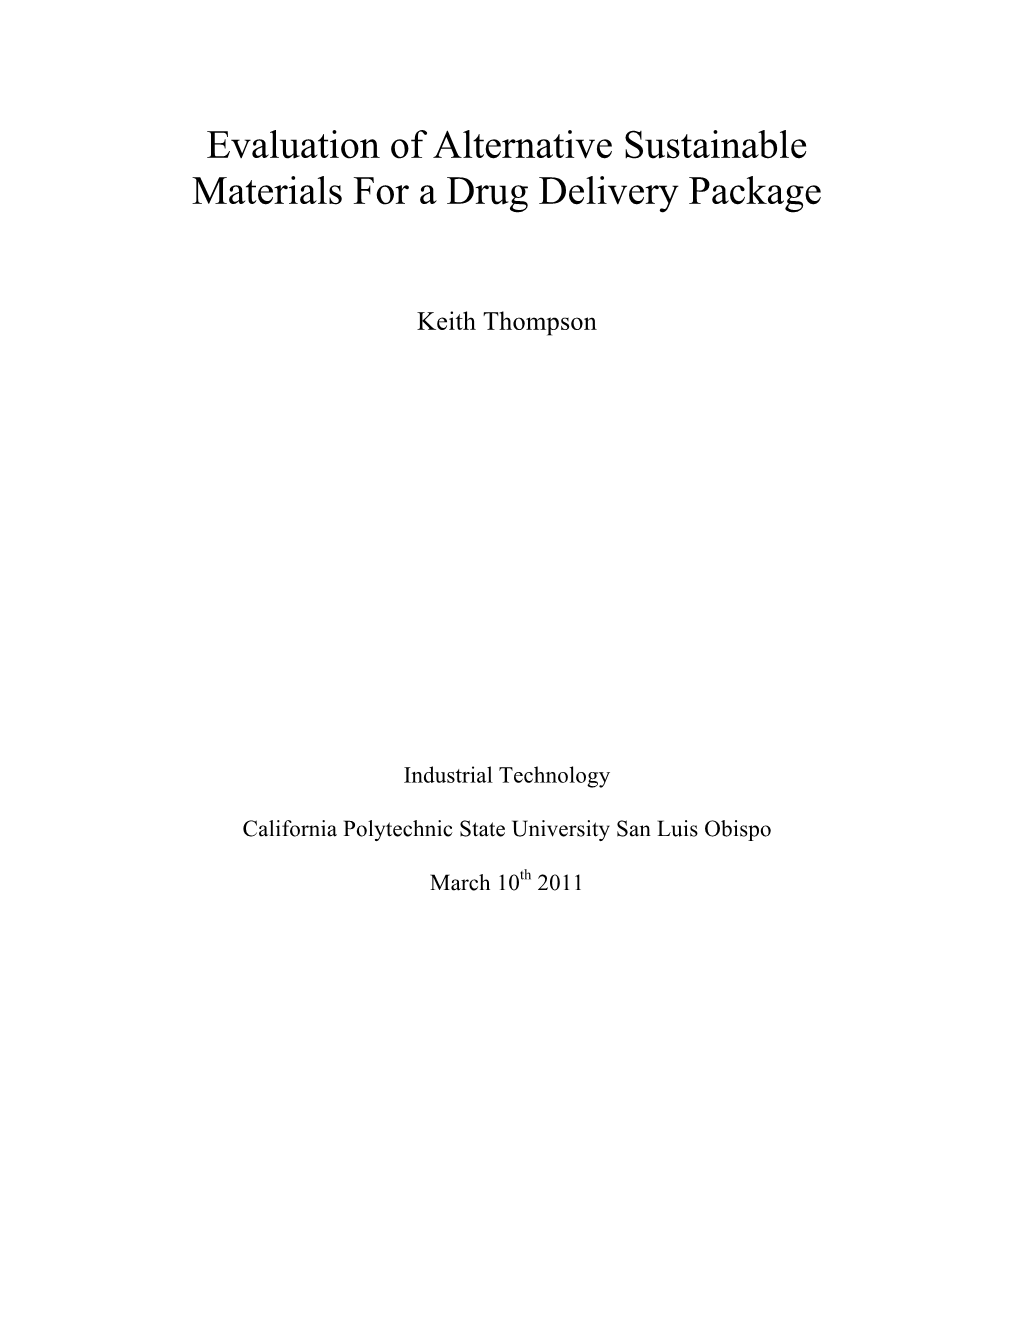 Evaluation of Alternative Sustainable Materials for a Drug Delivery Package